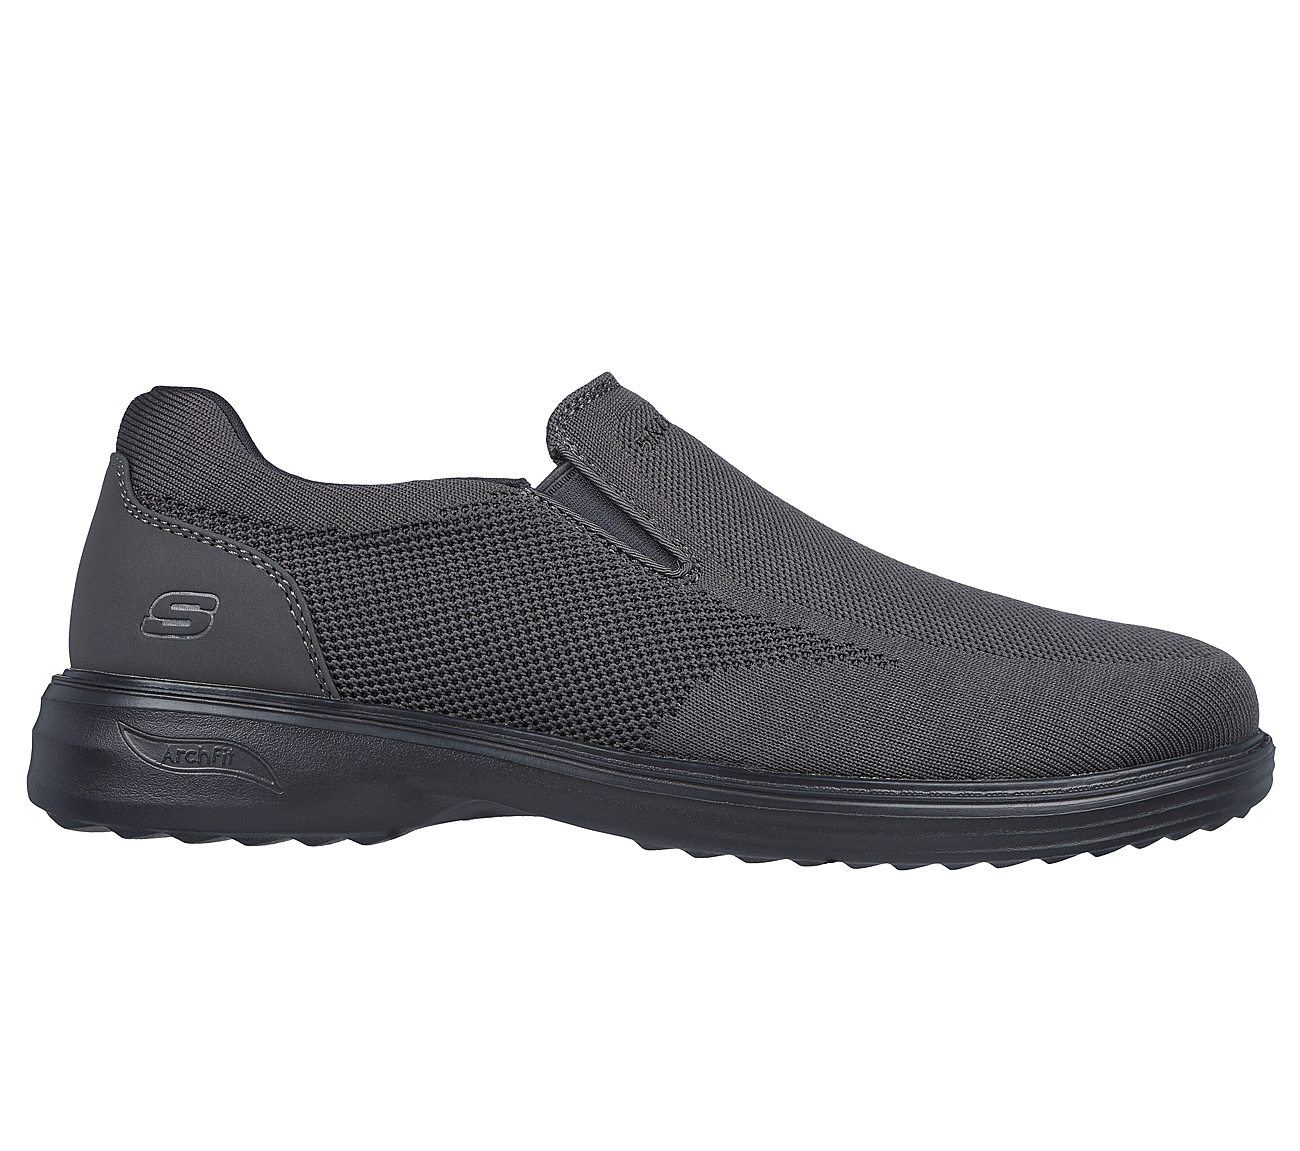 ARCH FIT OGDEN, CCHARCOAL Footwear Lateral View